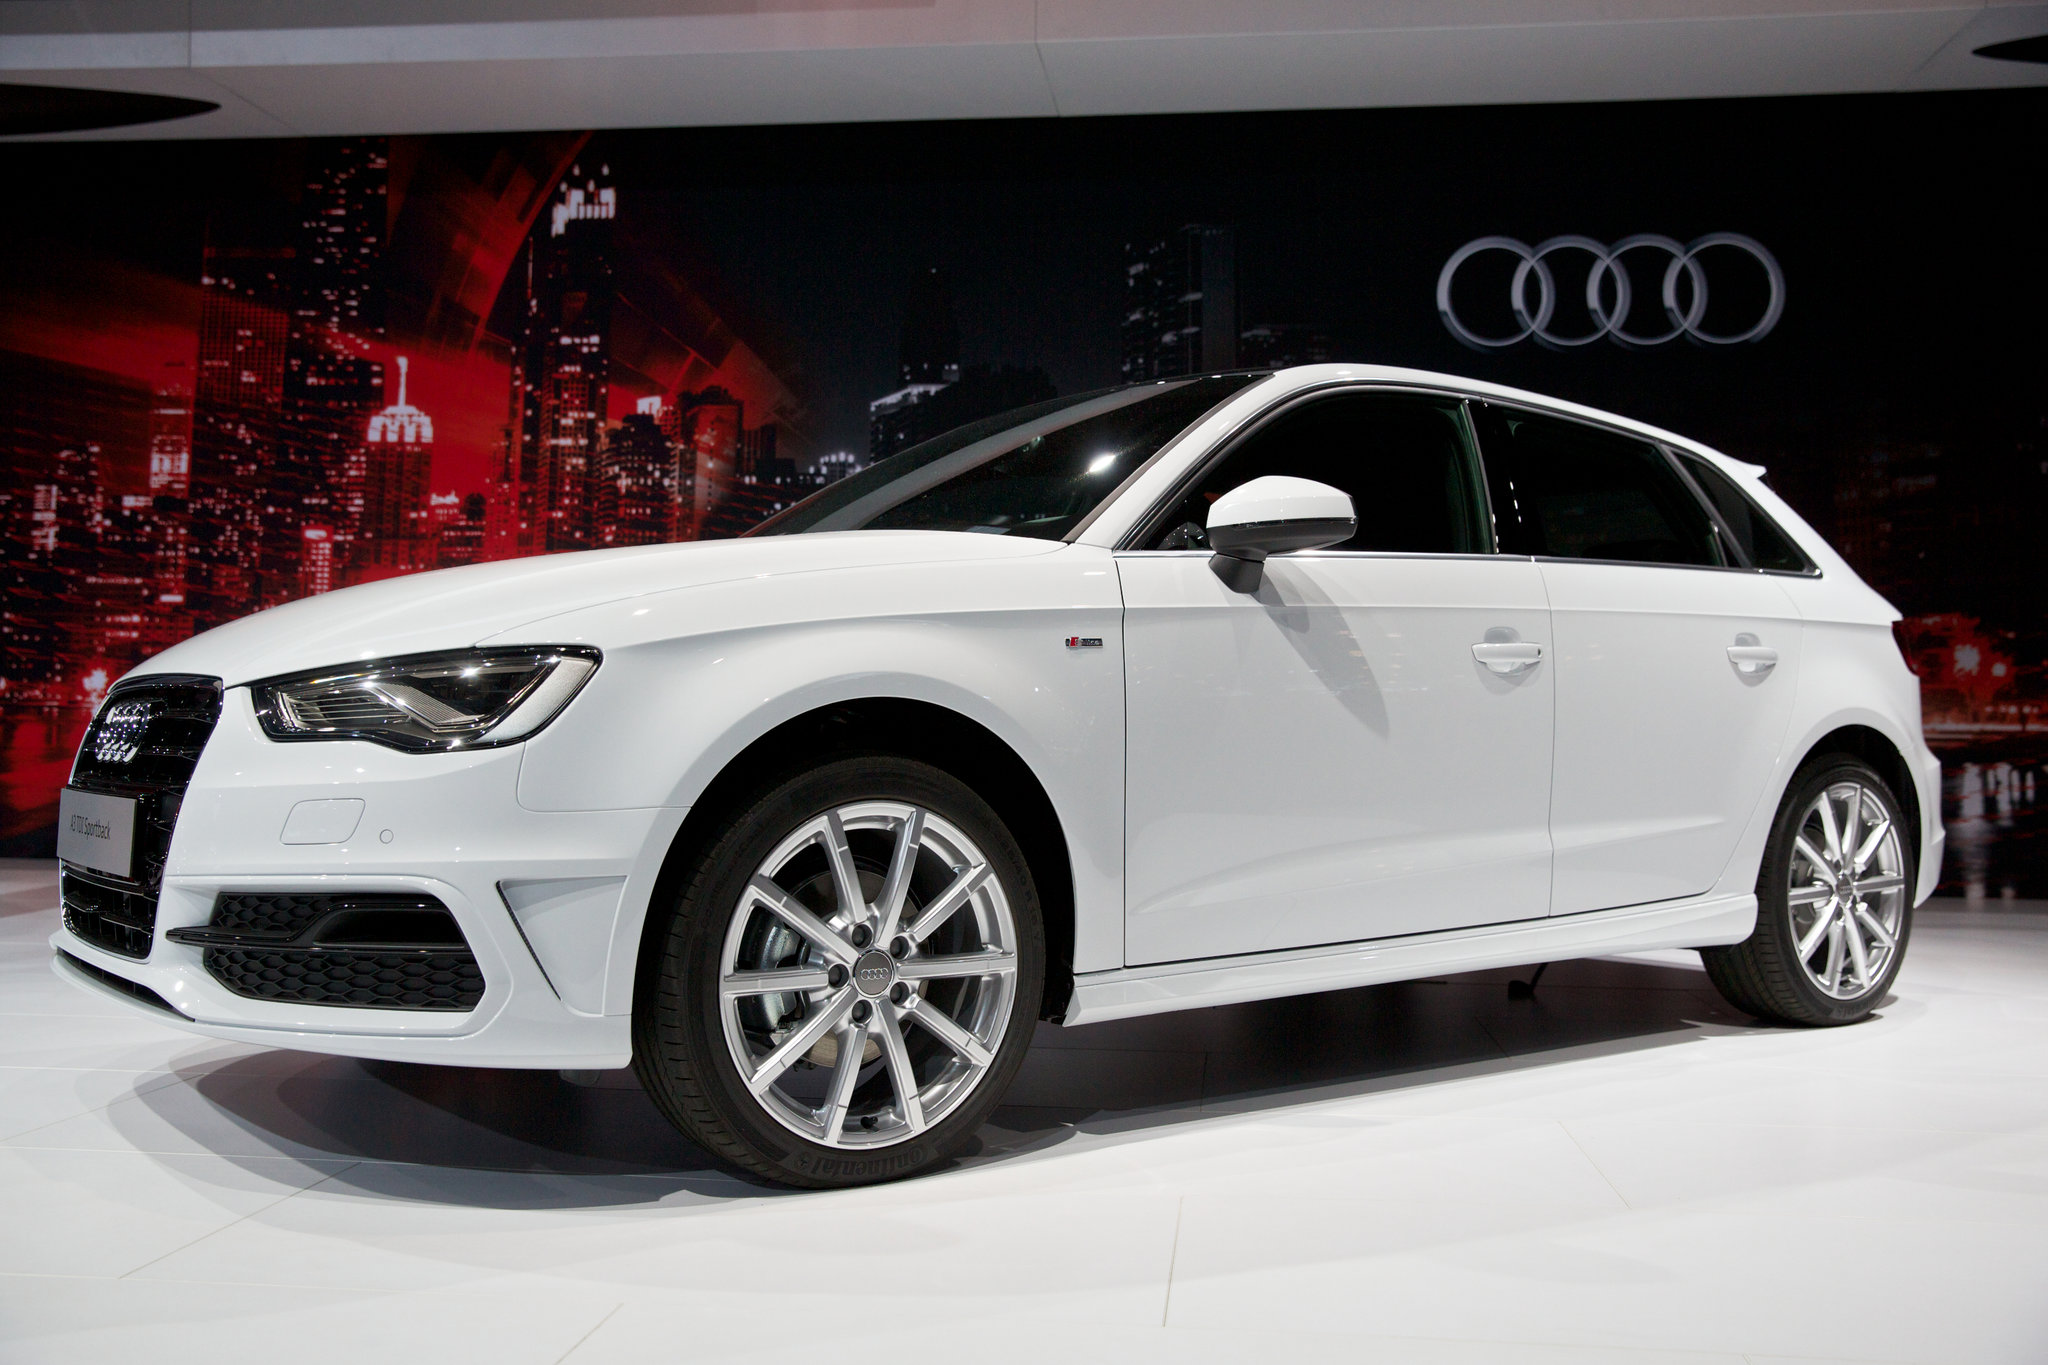 2016 Audi A3 TDI Sportback: The A3 Family Gets a Wagon - The New York Times